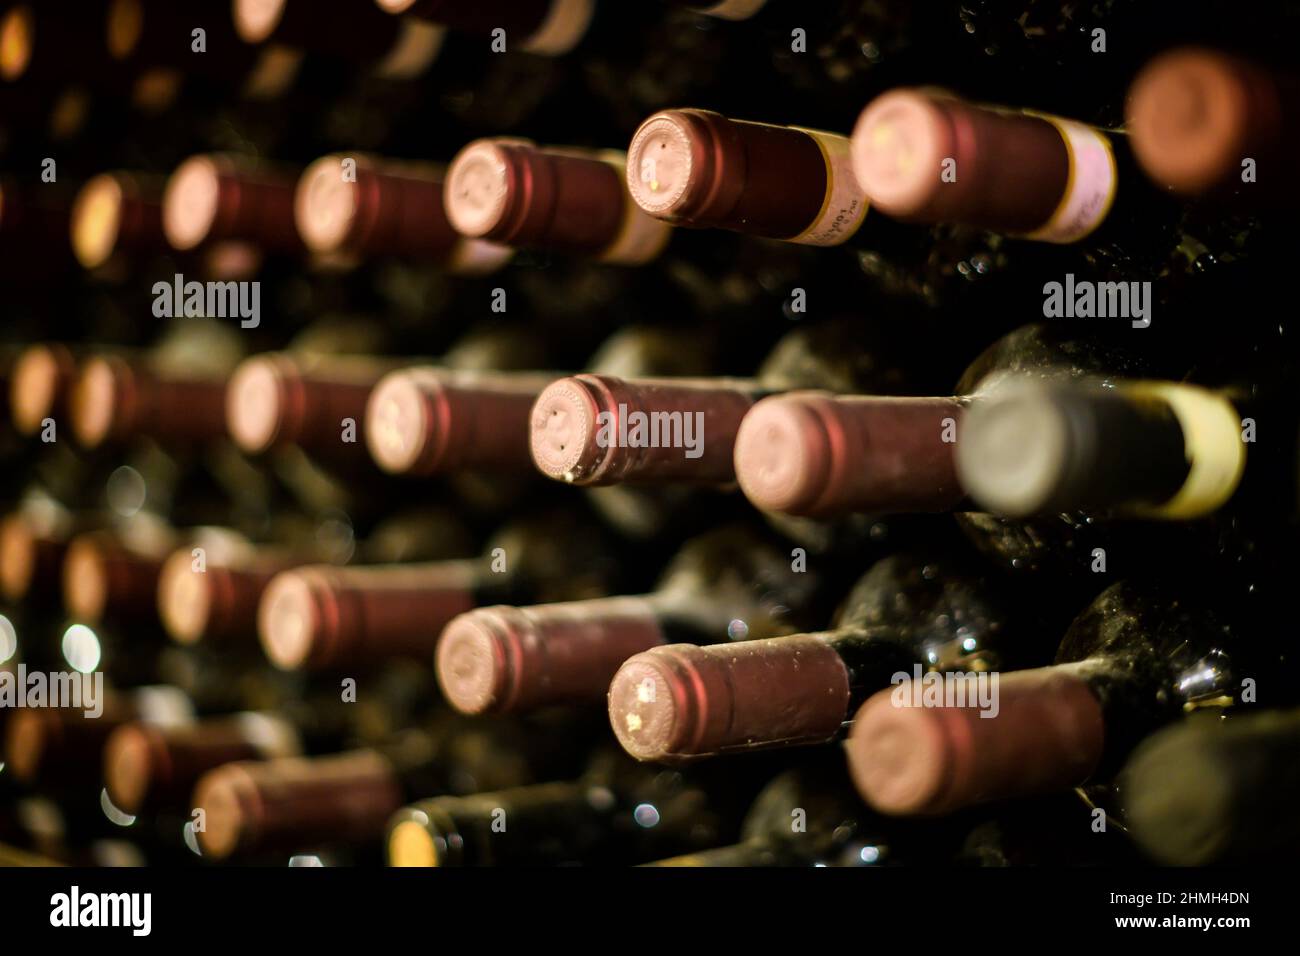 Rows of foil sealed red wine bottles maturing in a cellar on racks in an oblique angle receding view in an oenology, viticulture and wine production c Stock Photo